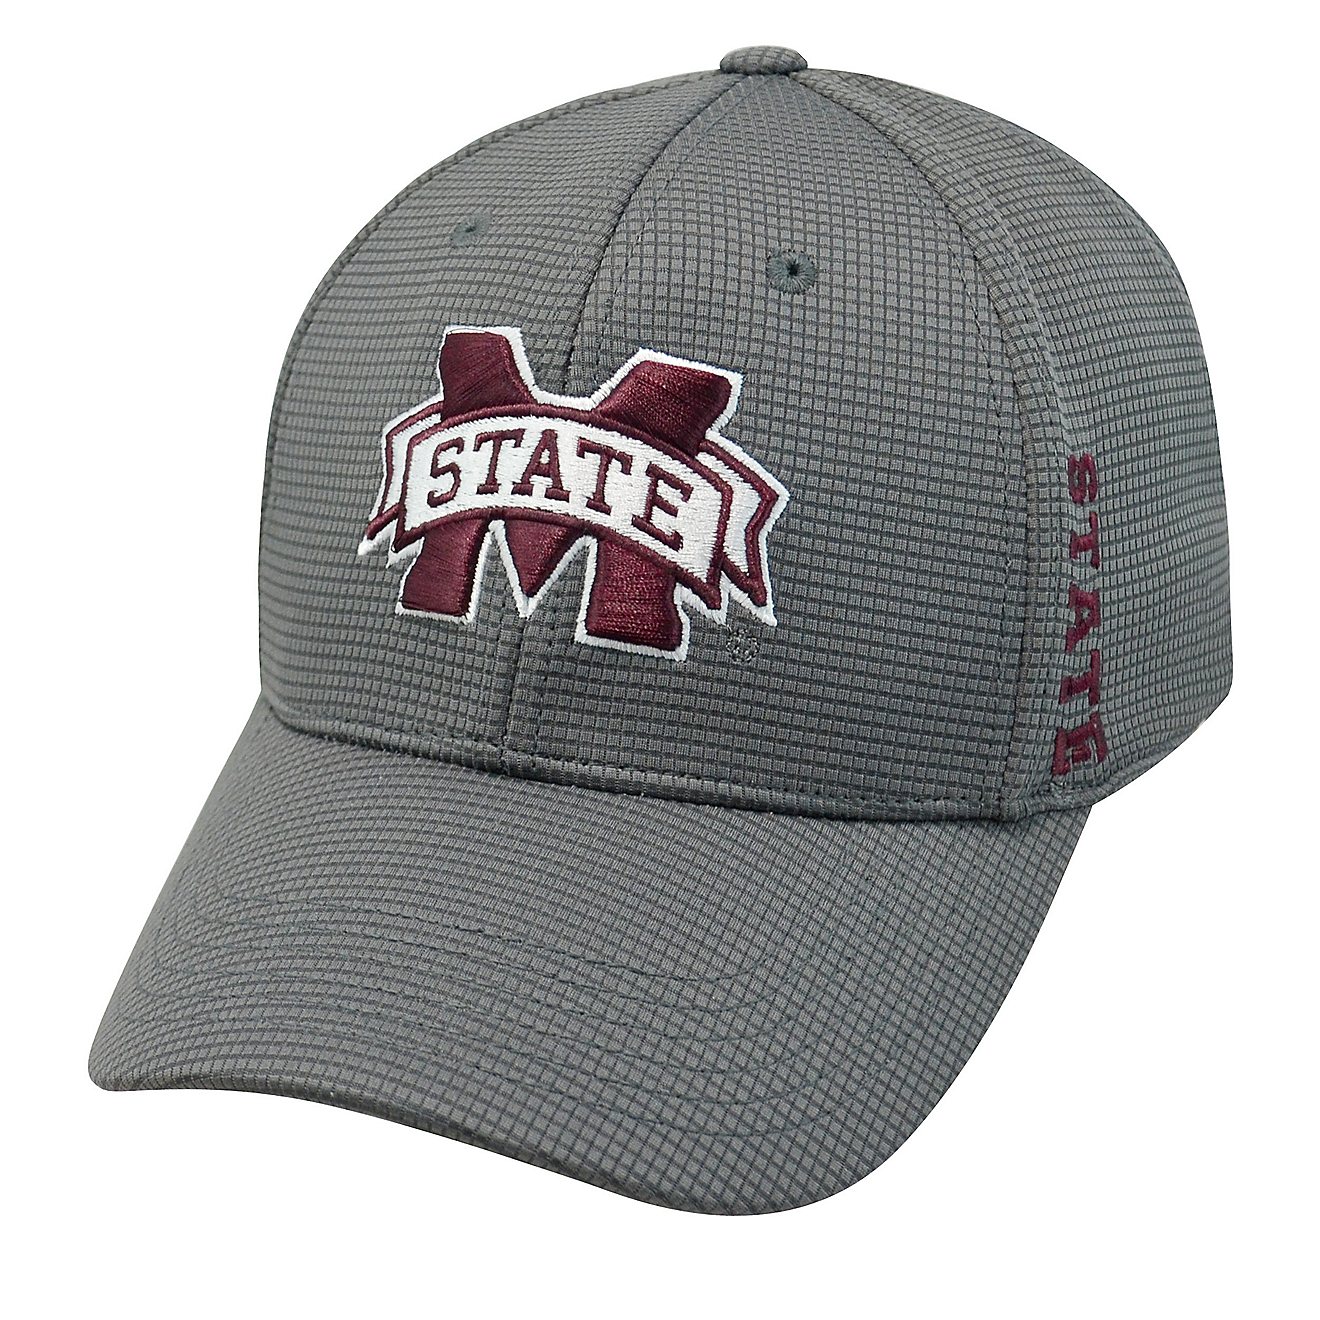 Top of the World Men's Mississippi State University Booster Plus Cap                                                             - view number 1